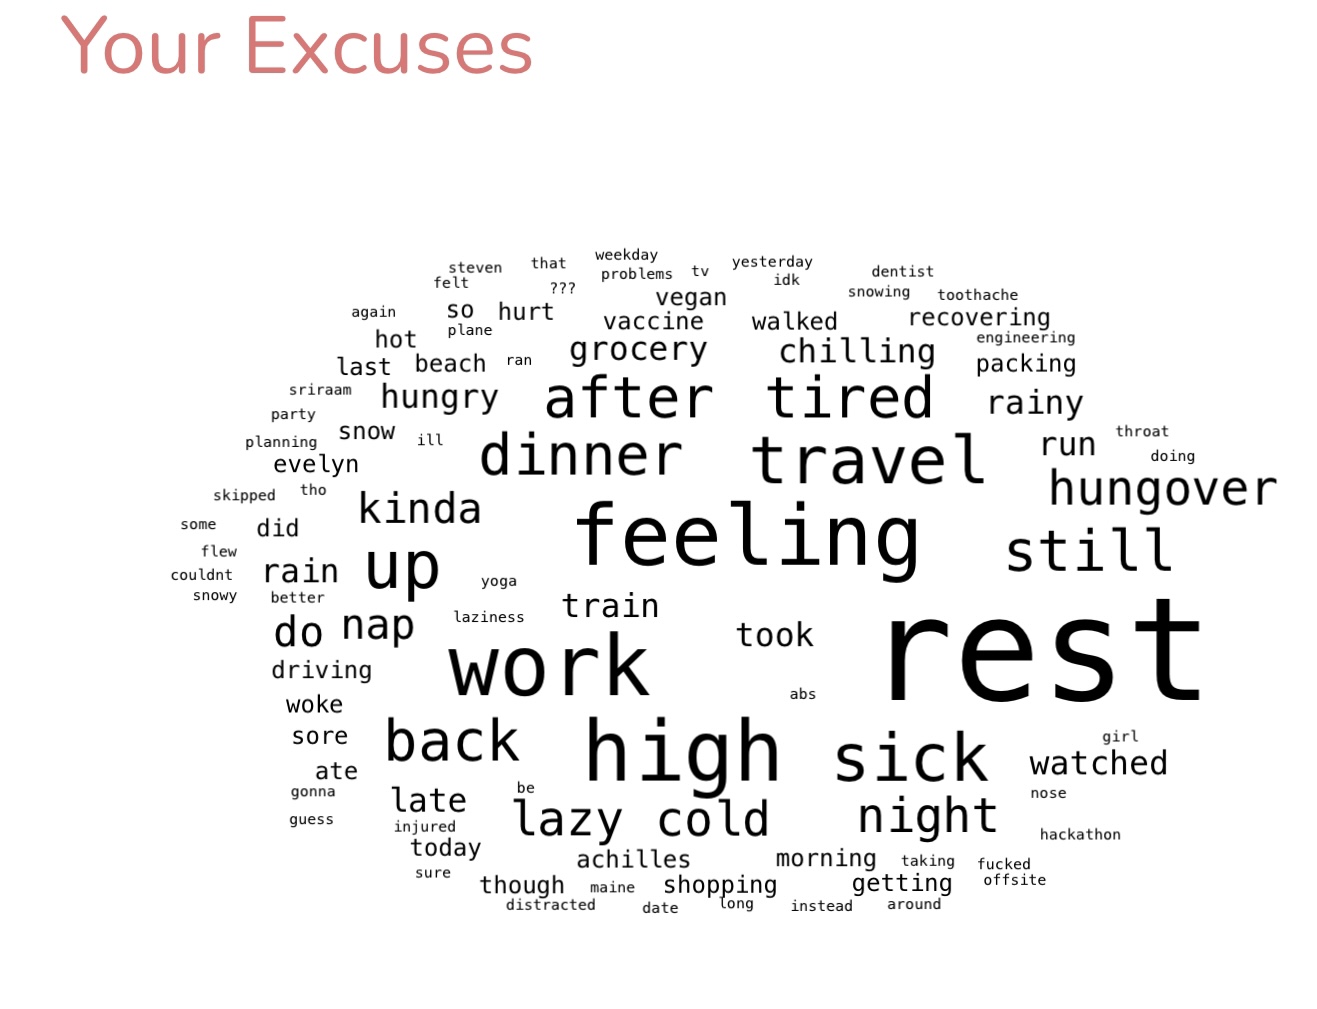 A wordcloud showing the author's most frequent excuses